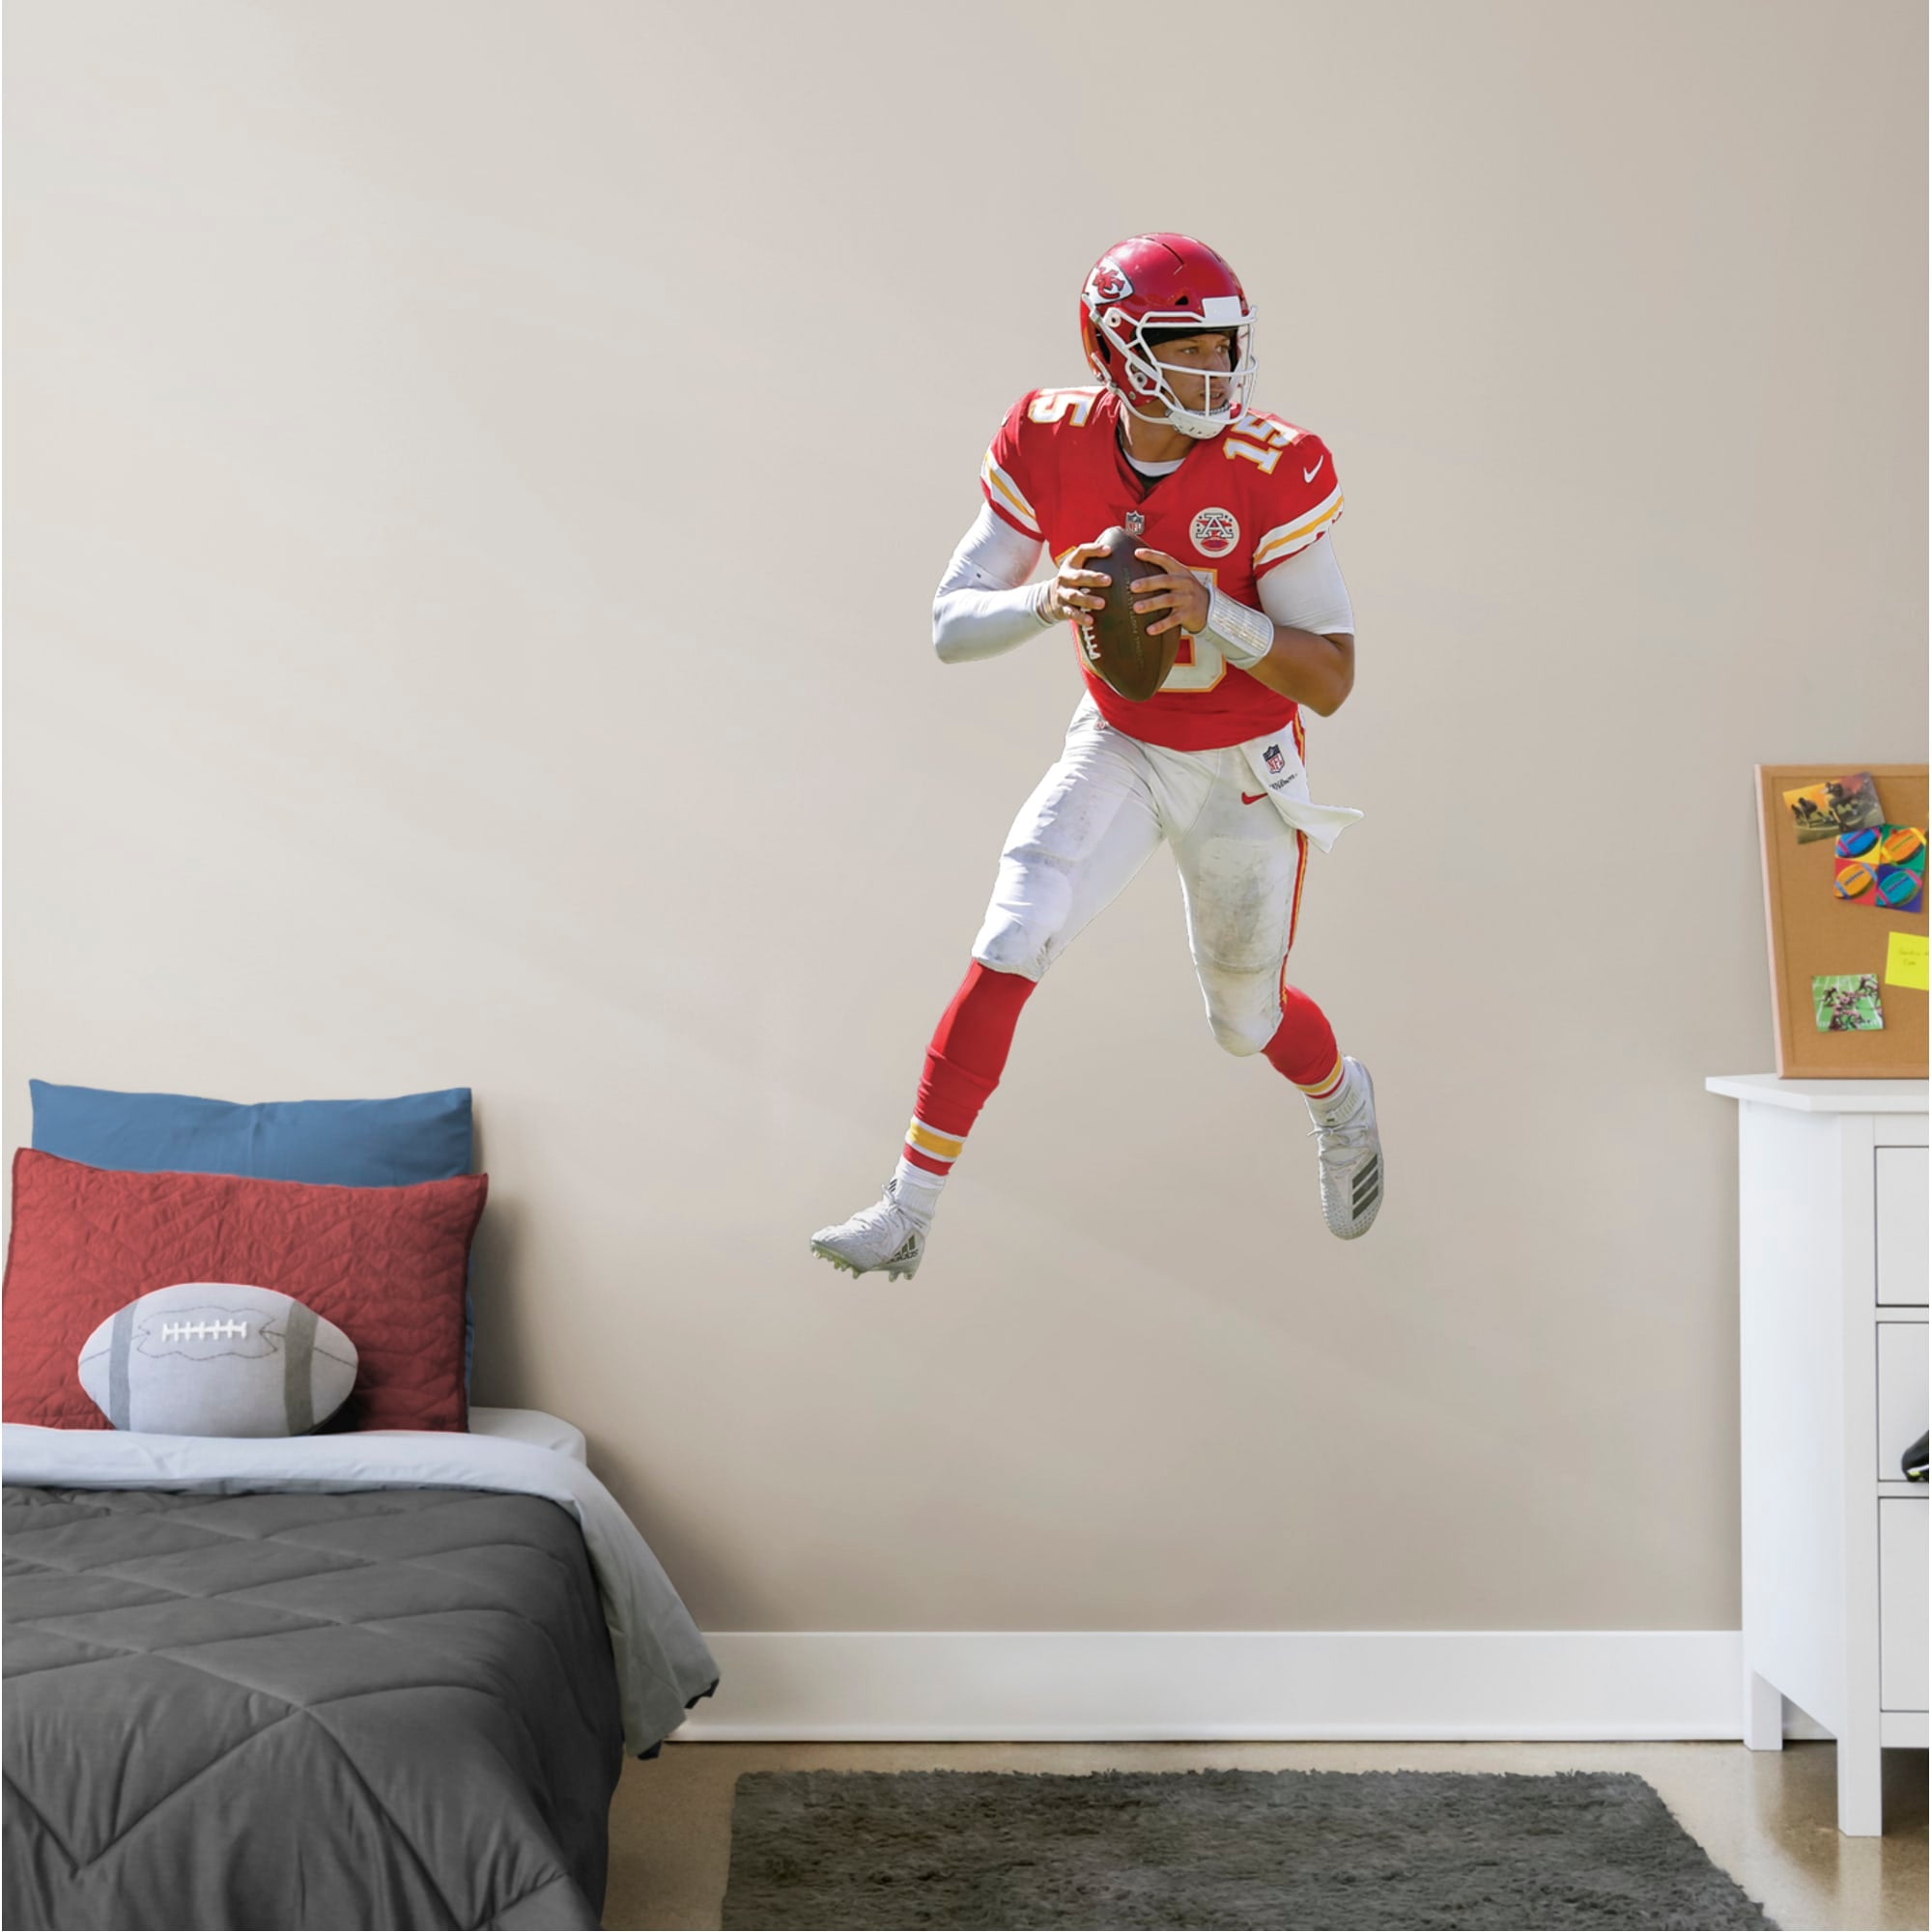 Patrick Mahomes for Kansas City Chiefs - Officially Licensed NFL Removable Wall Decal Giant Athlete + 2 Decals (28"W x 51"H) by